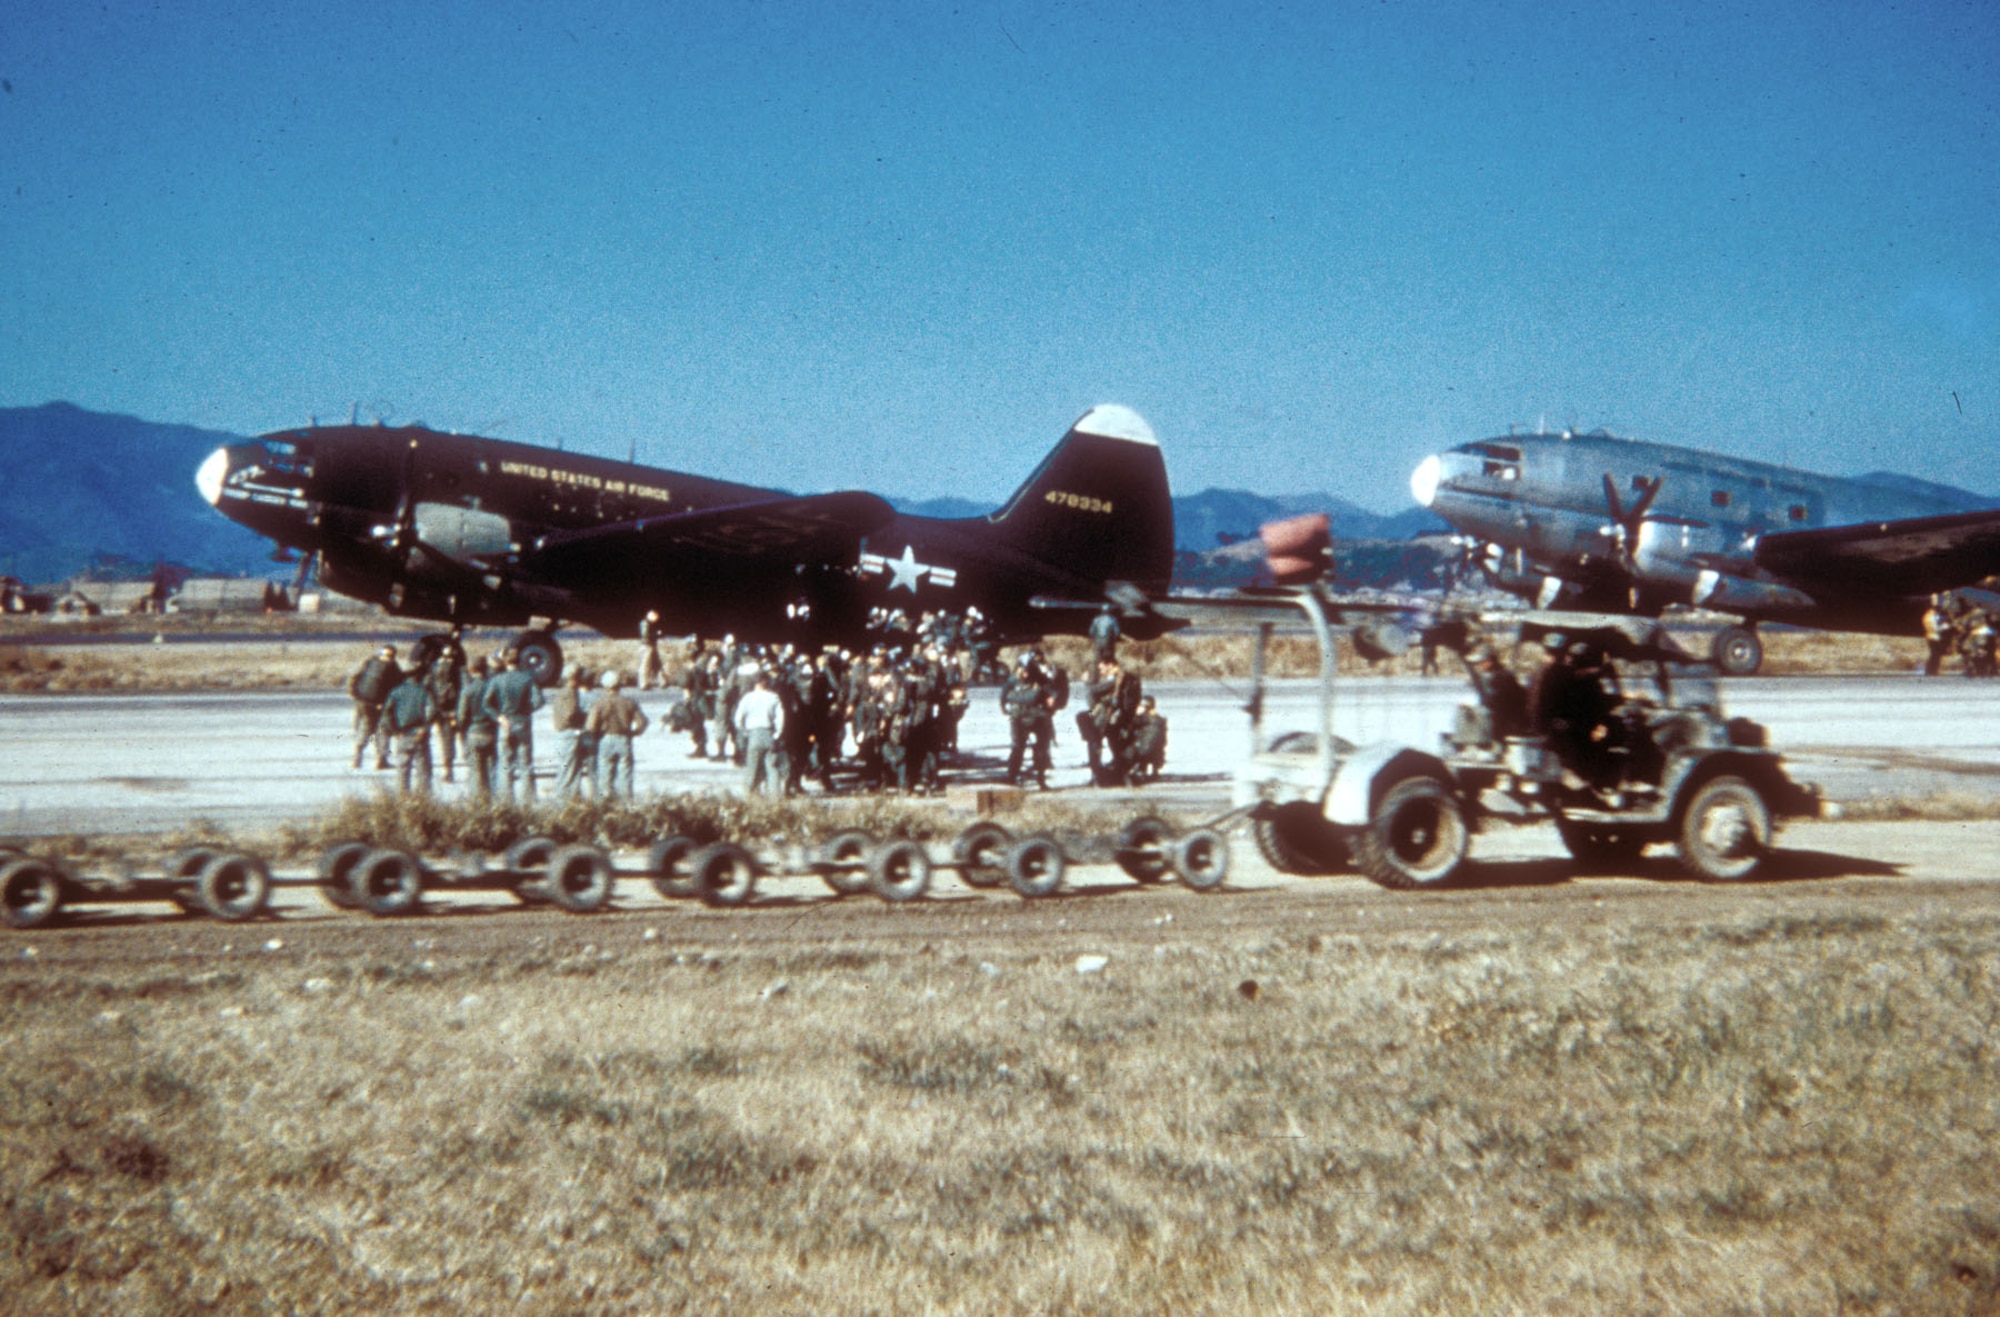 The World War II-era C-46 continued in service in Korea, where it airlanded supplies and supplemented C-119s during paratroop drops. (U.S. Air Force photo)